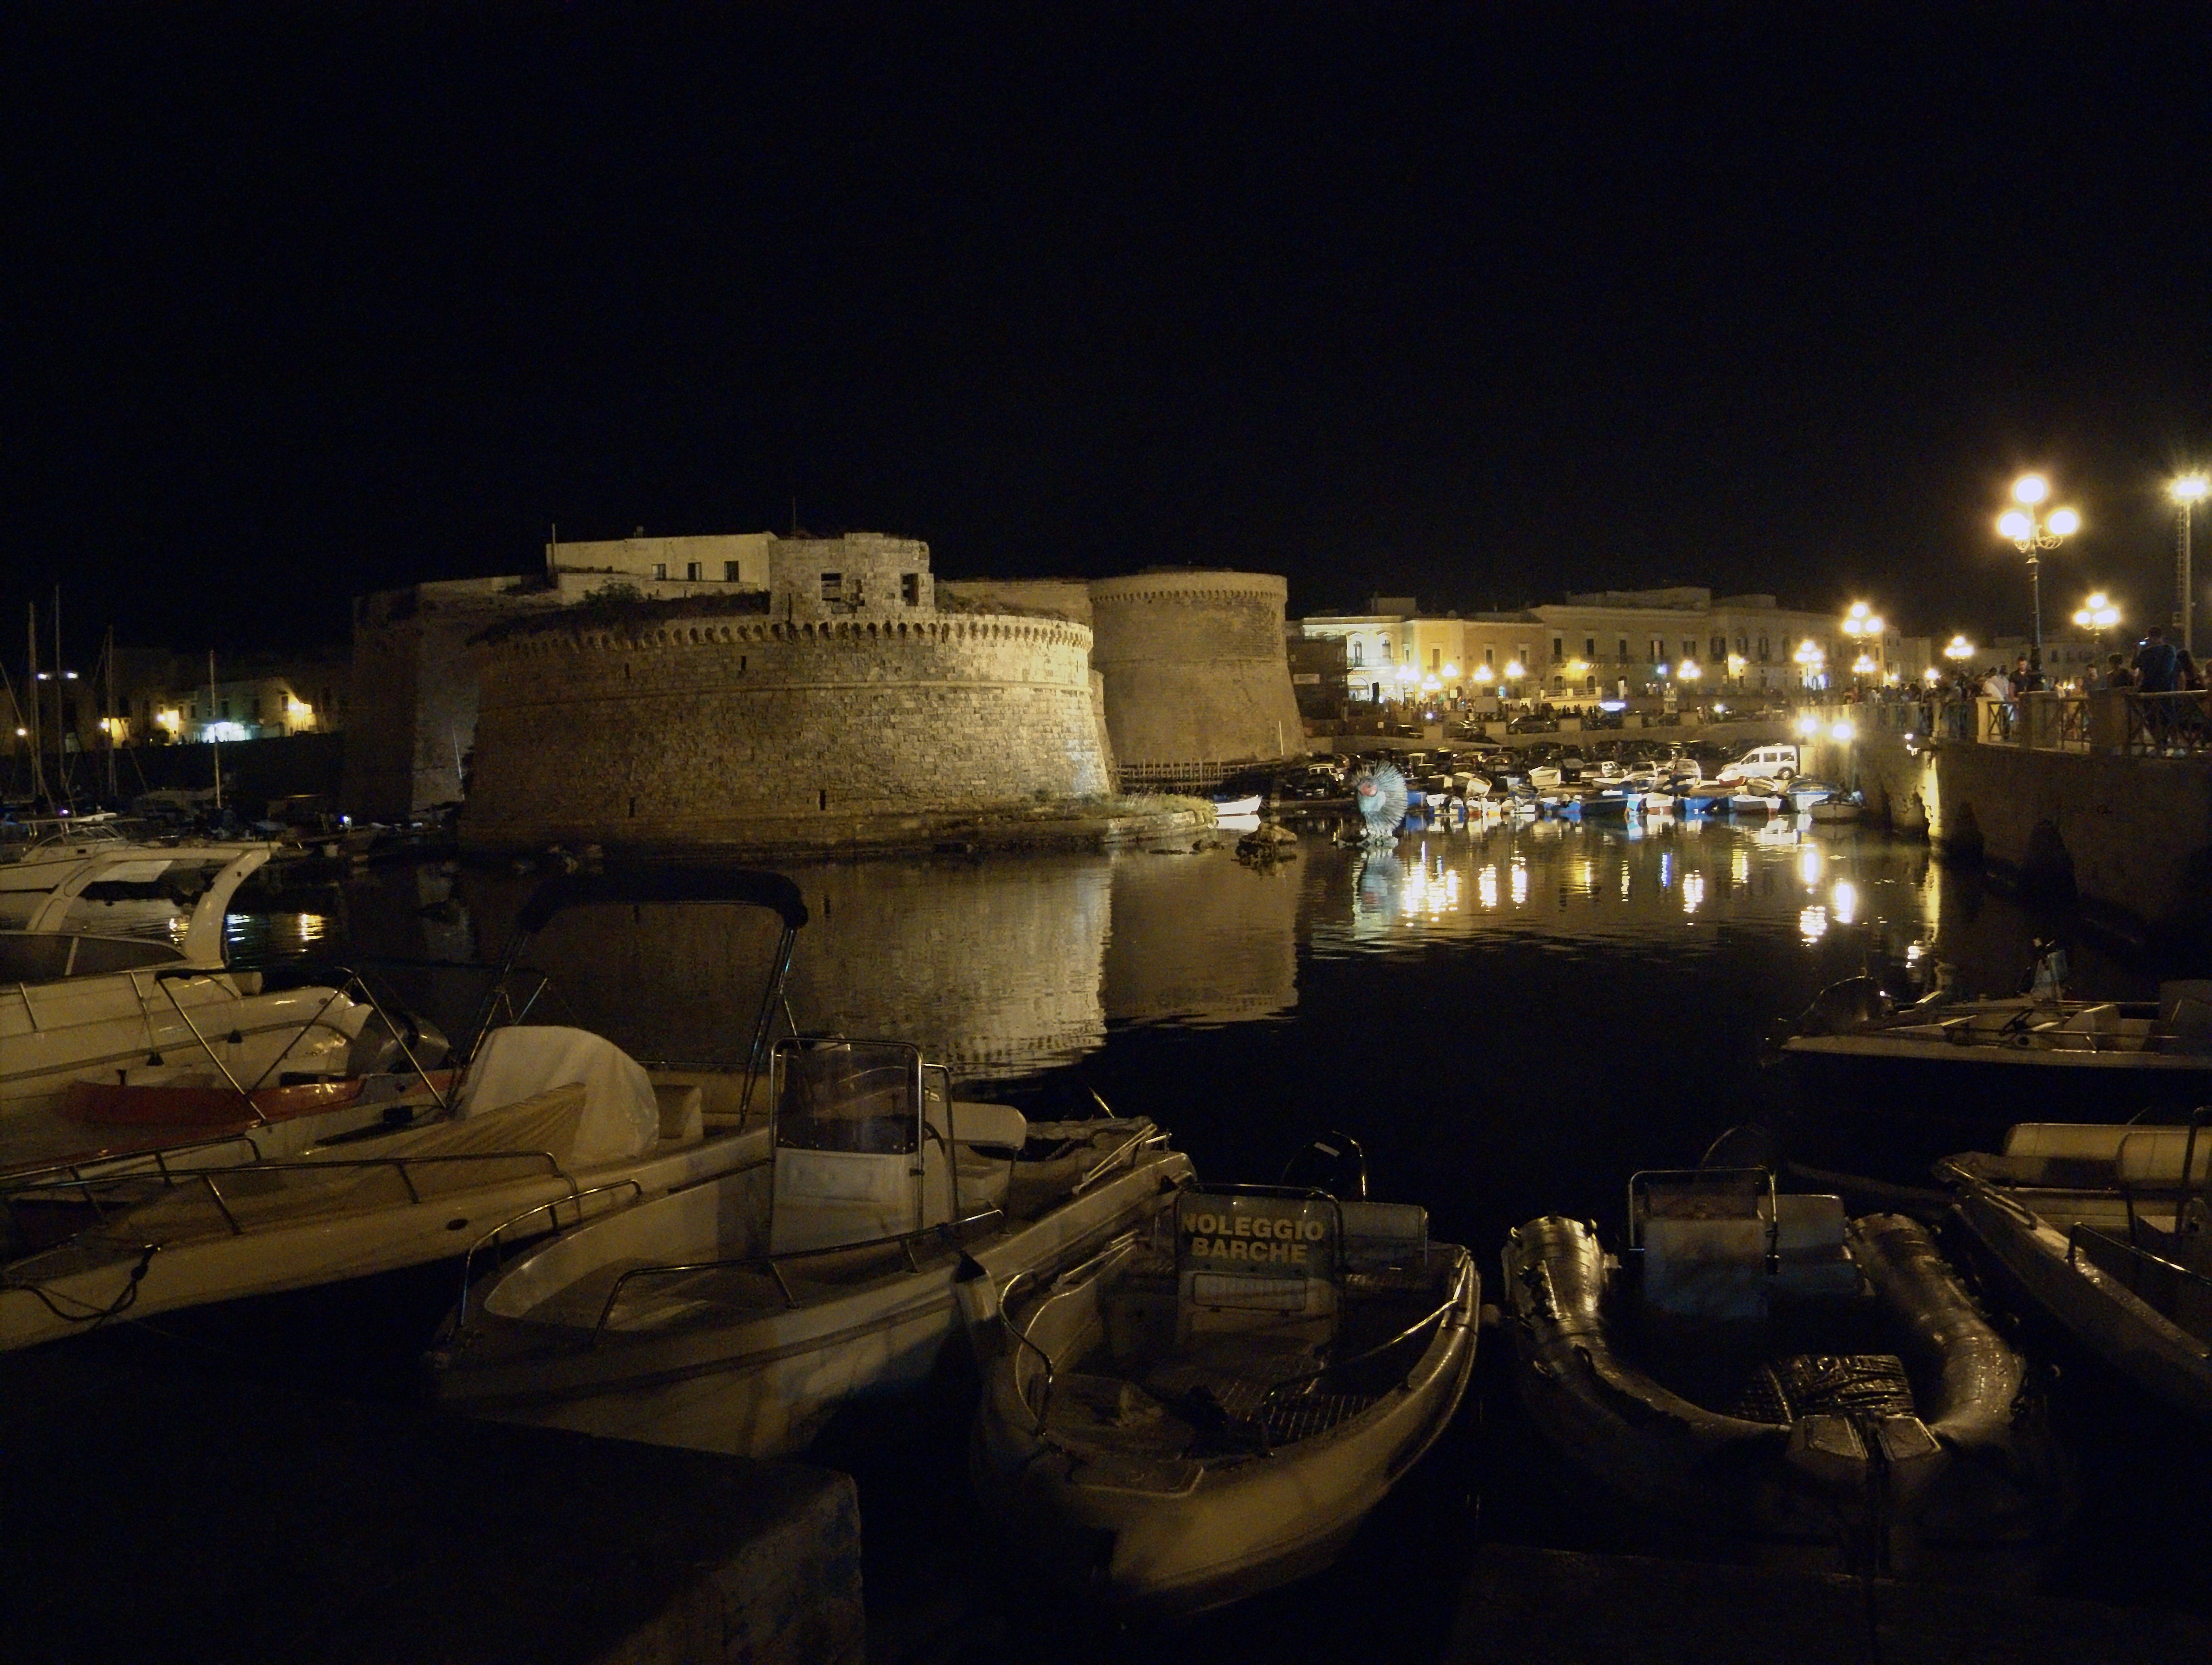 Gallipoli (Lecce, Italy): The fortess of the old Gallipoli - Gallipoli (Lecce, Italy)